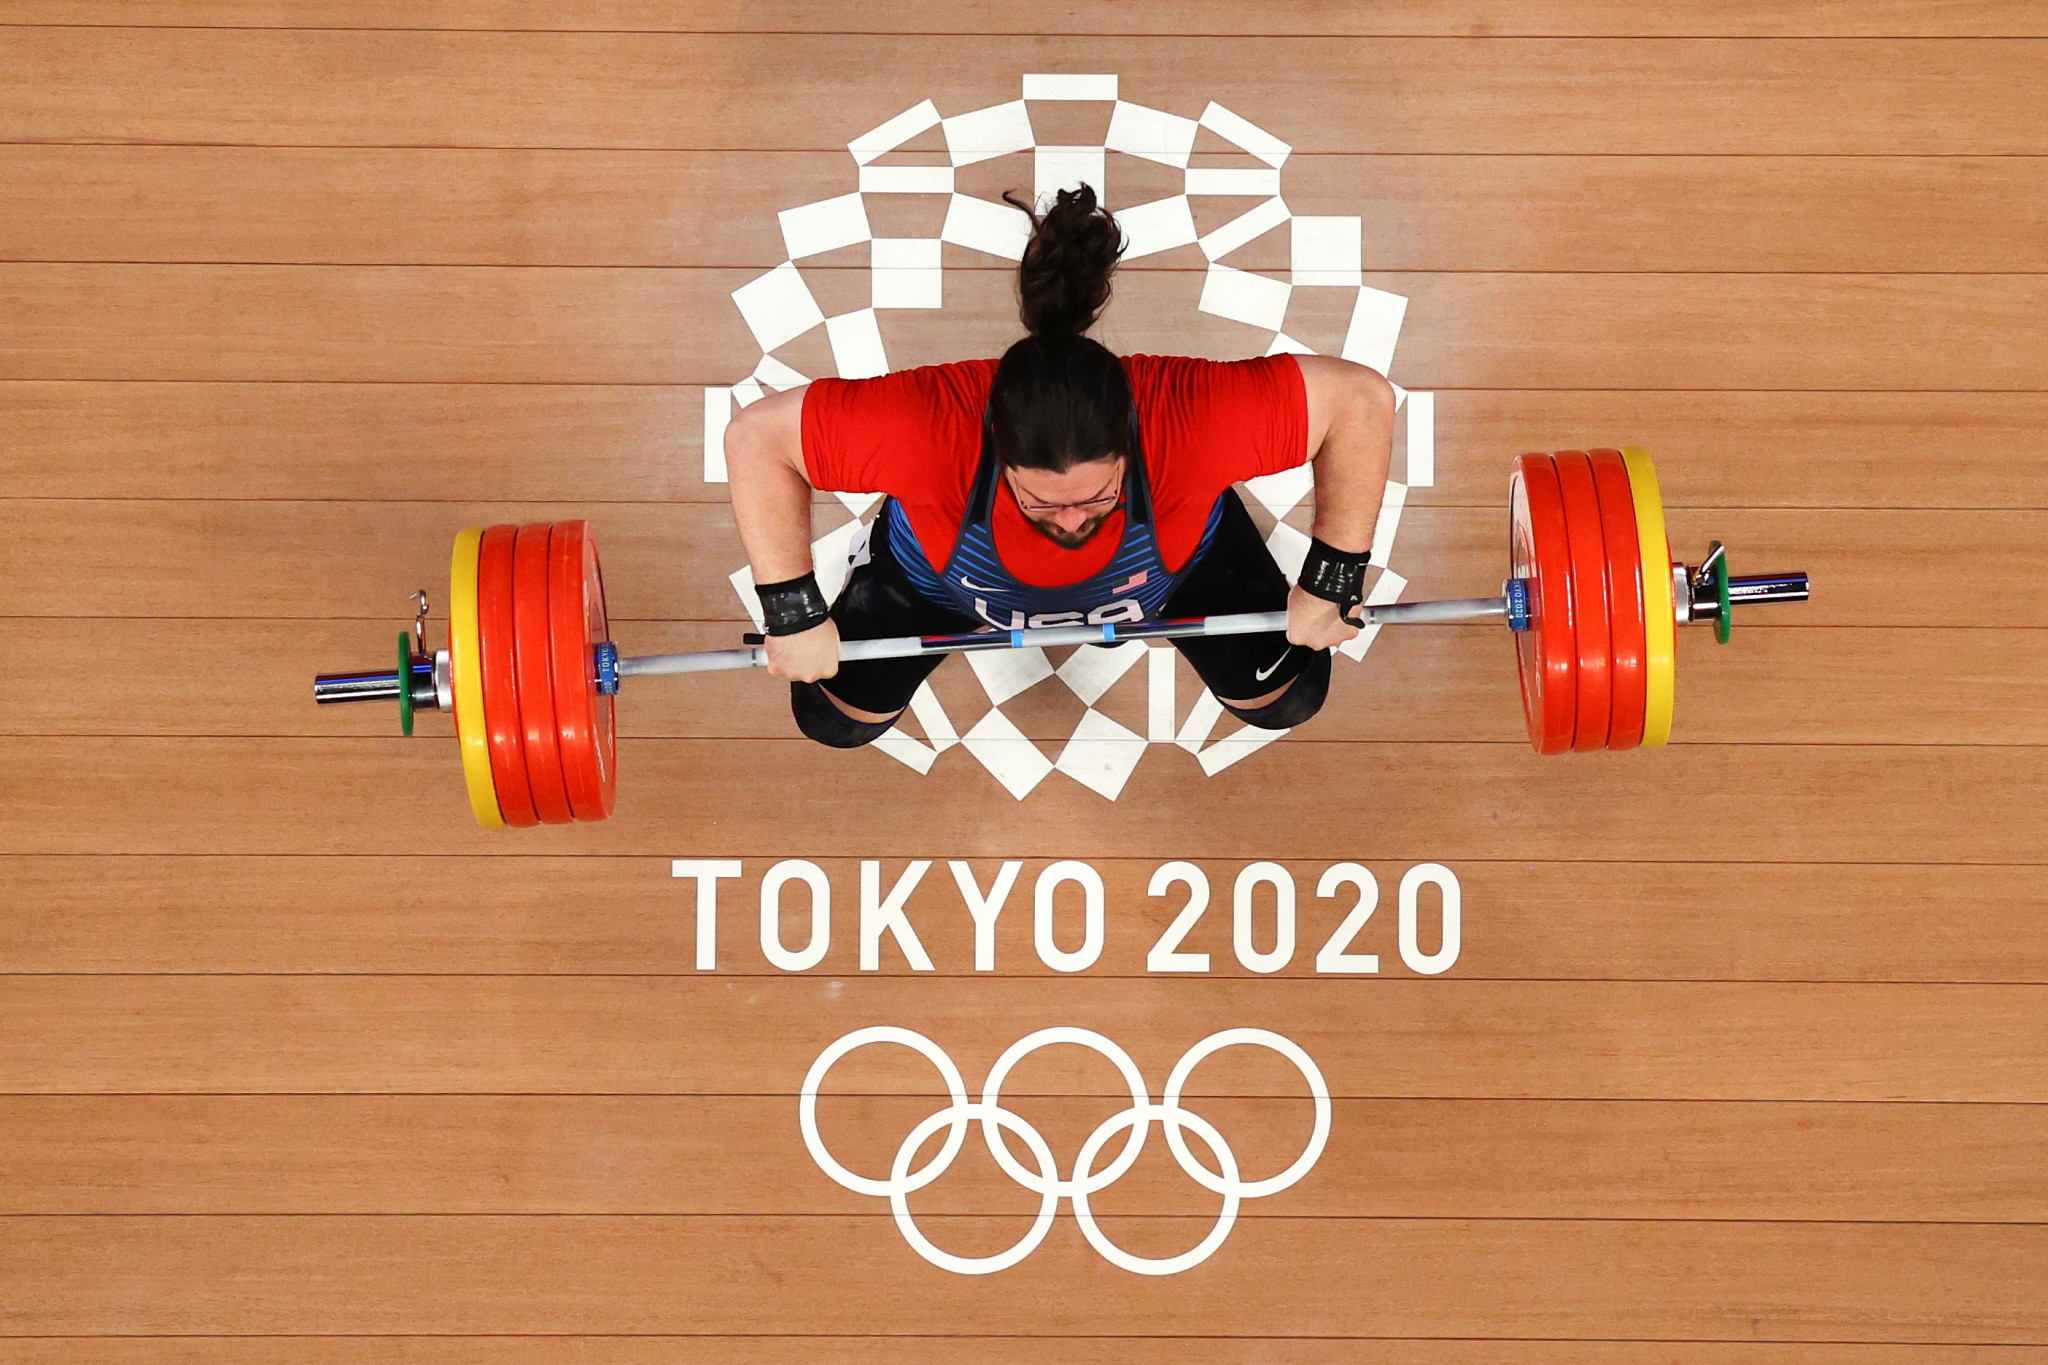 Weightlifting is at risk of being dropped from the Los Angeles 2028 Olympic programme ©Getty Images